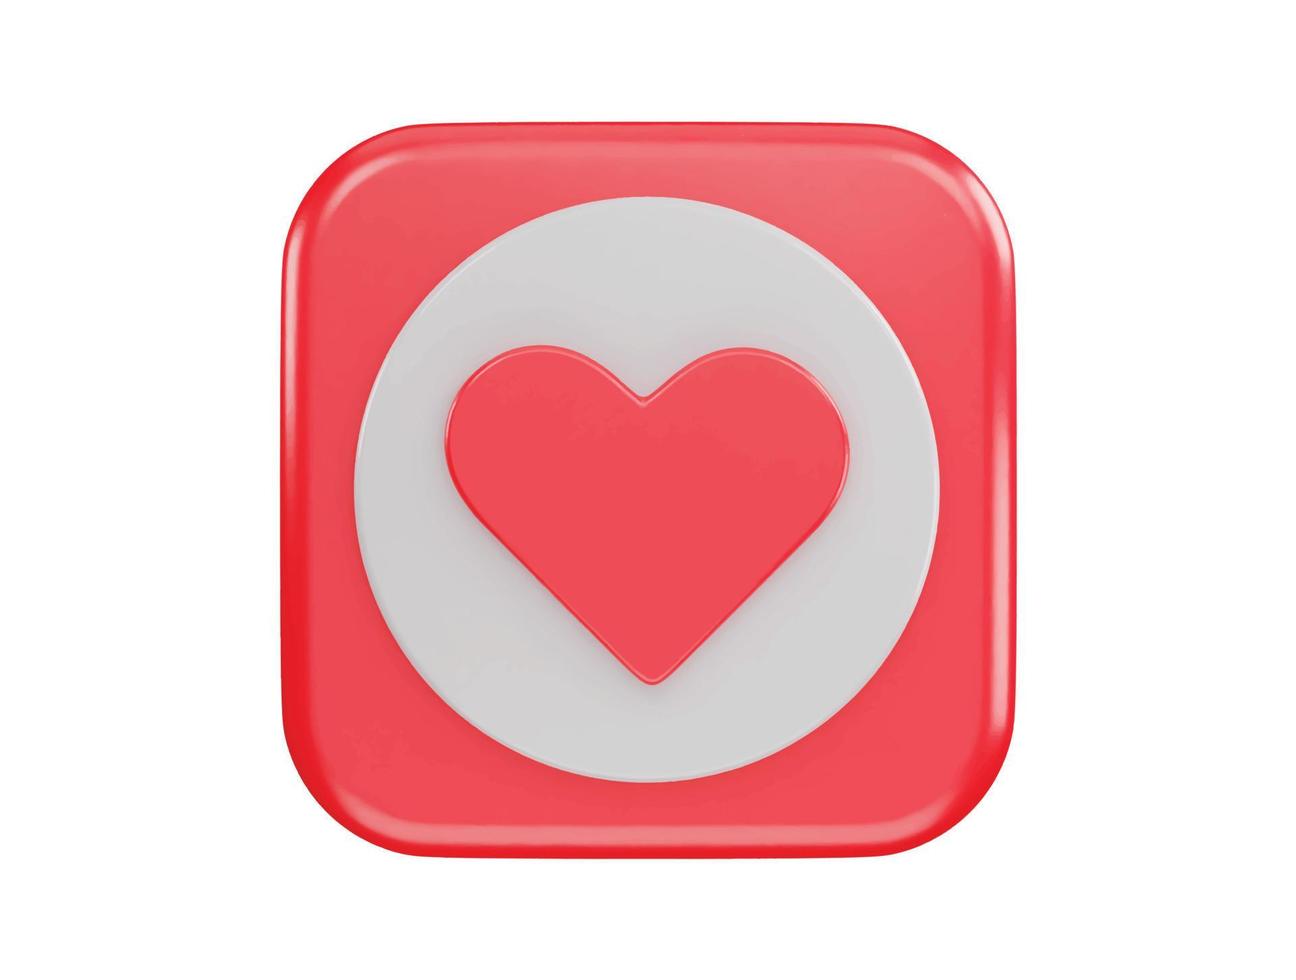 red heart icon 3d rendering vector illustration